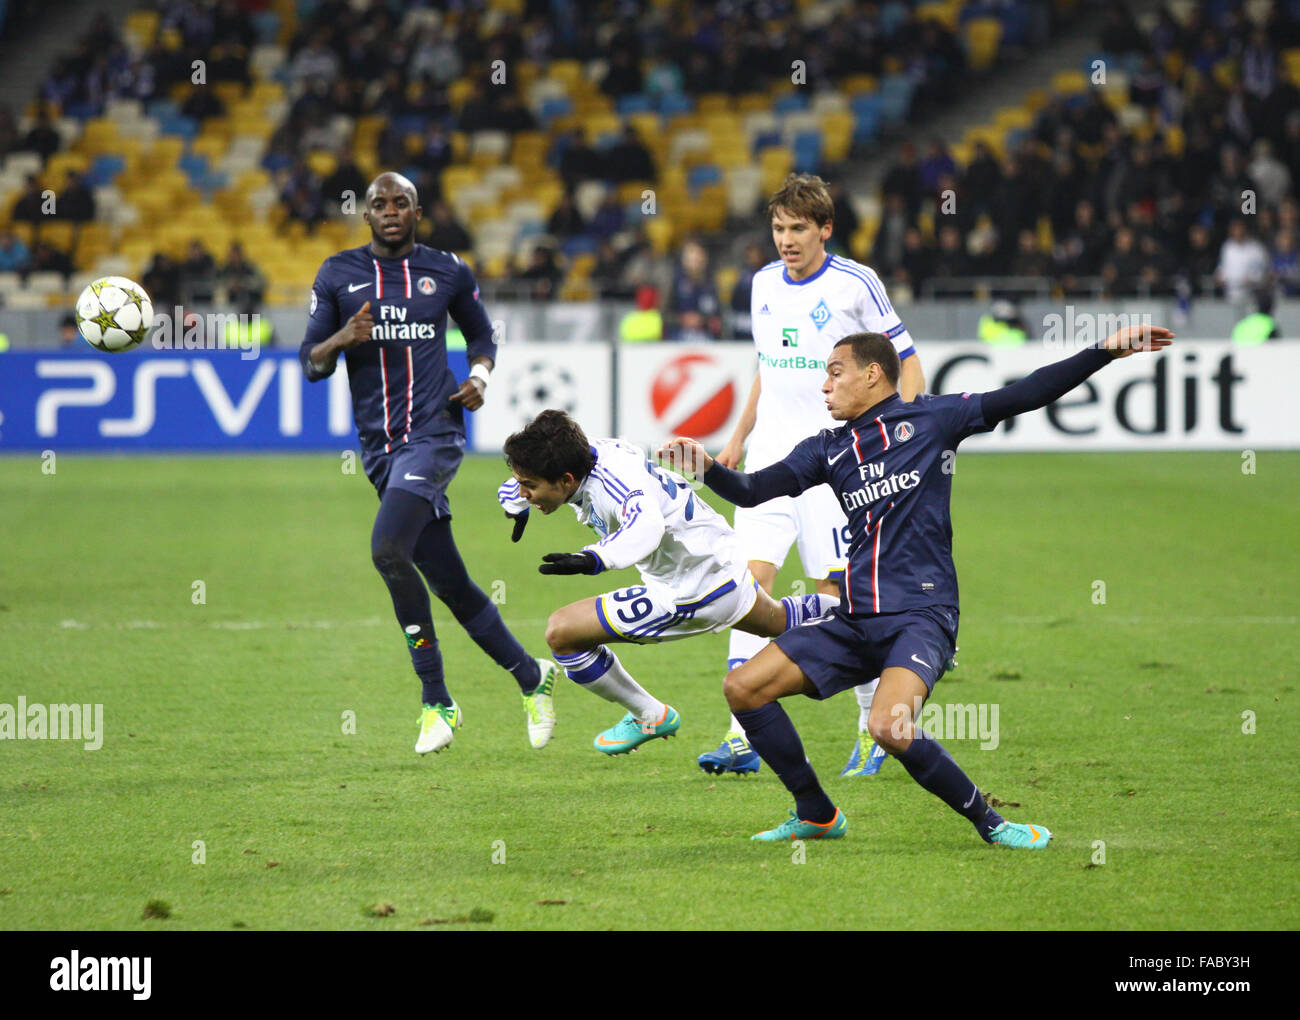 KYIV, UKRAINE - NOVEMBER 21, 2012: Gregory van der Wiel of FC Paris Saint-Germain (R, #23) fights for a ball with Dudu of FC Dynamo Kyiv (L, #99) during their UEFA Champions League game on November 21, 2012 in Kyiv, Ukraine Stock Photo